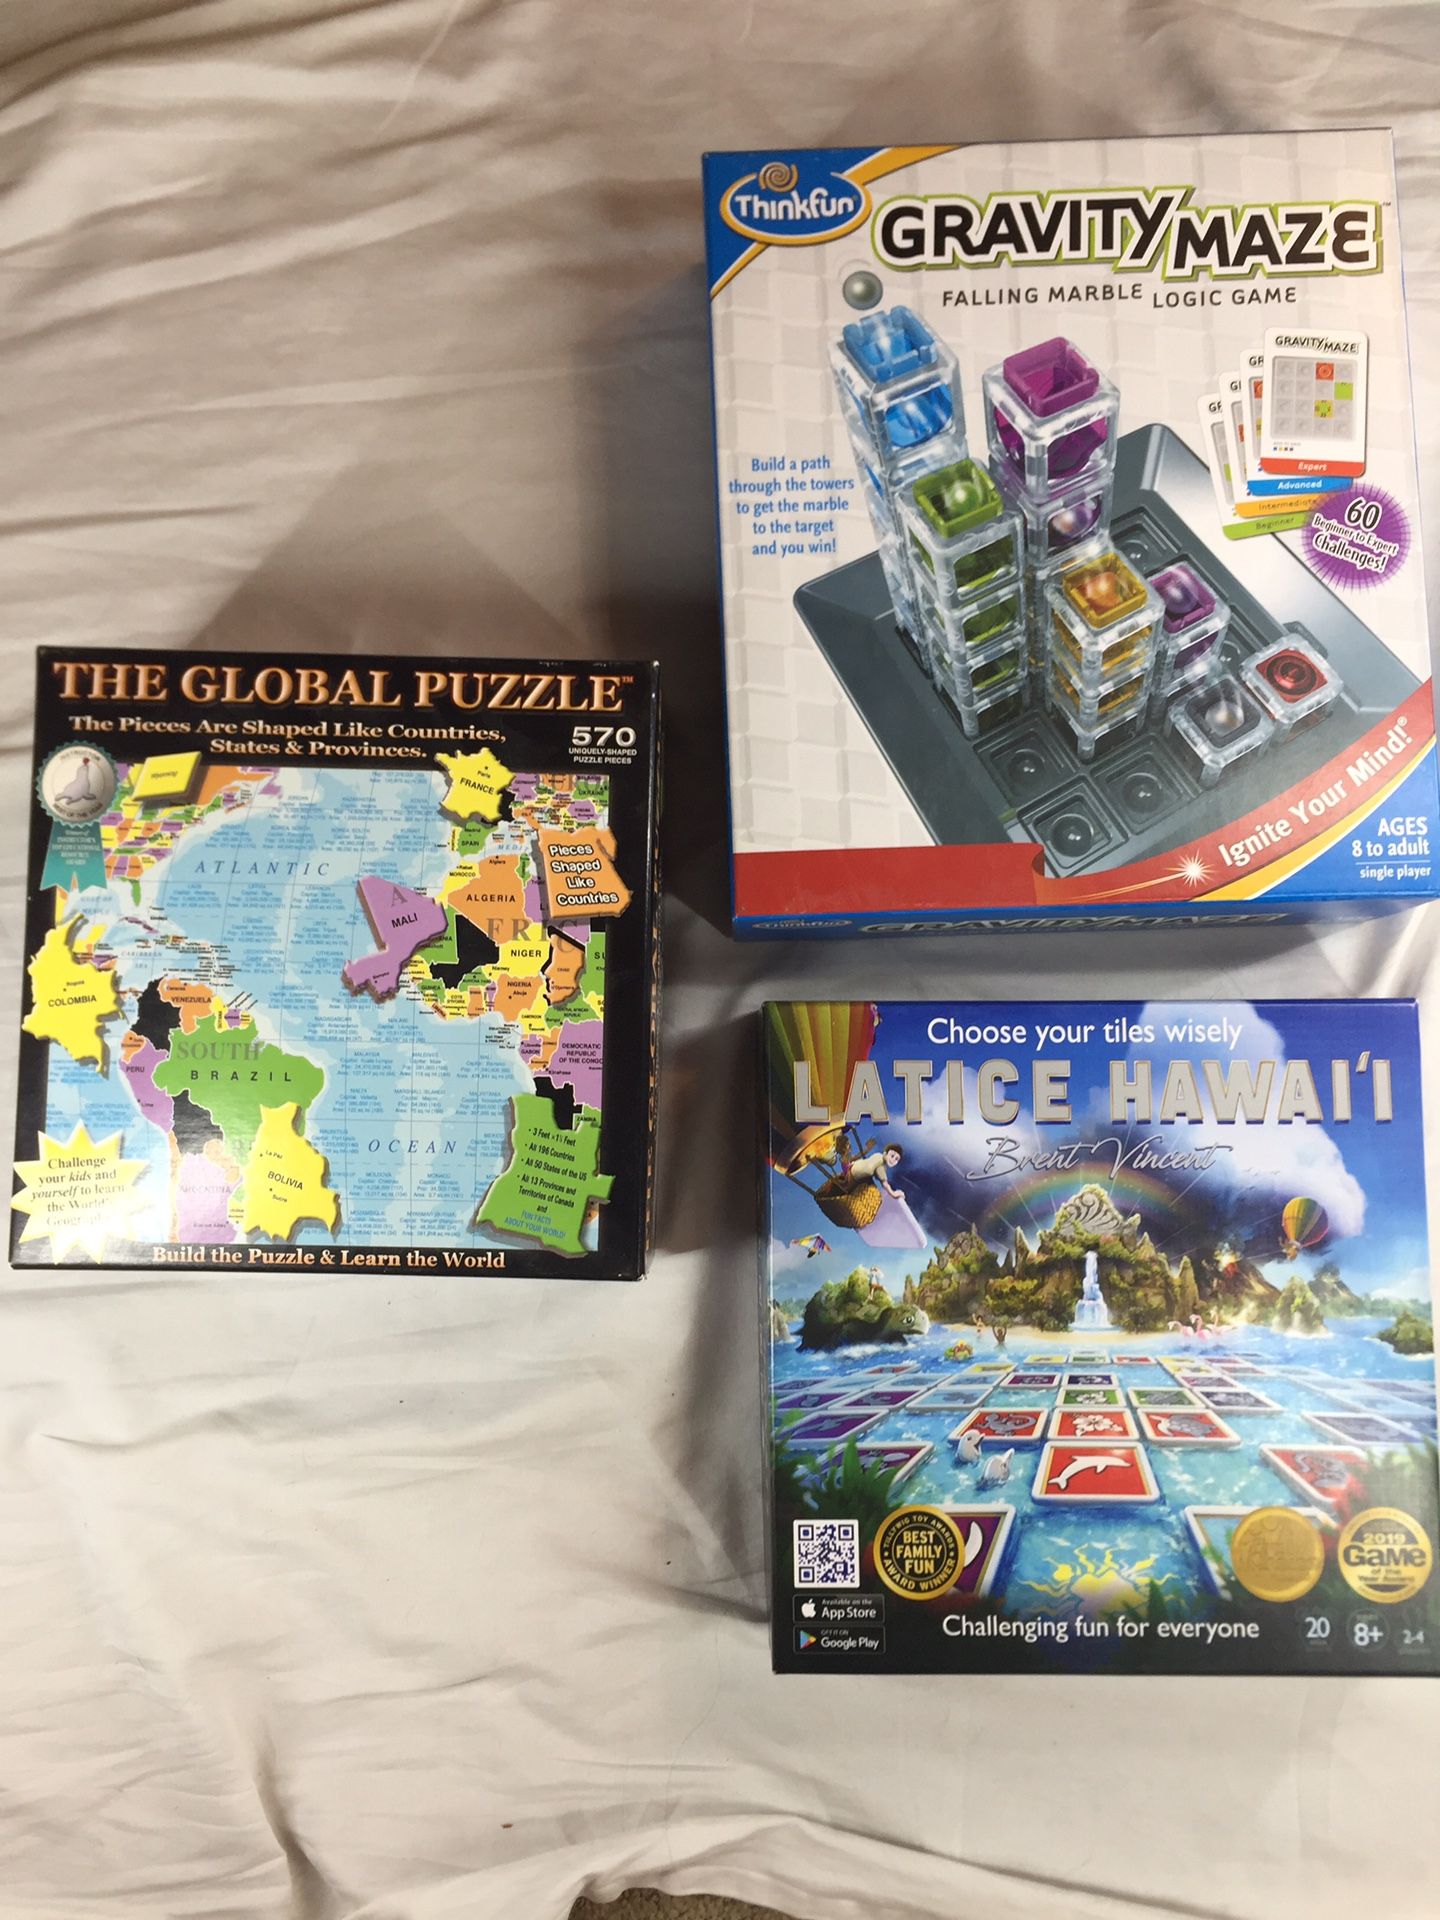 Excellent unique kid games and geography puzzle!!